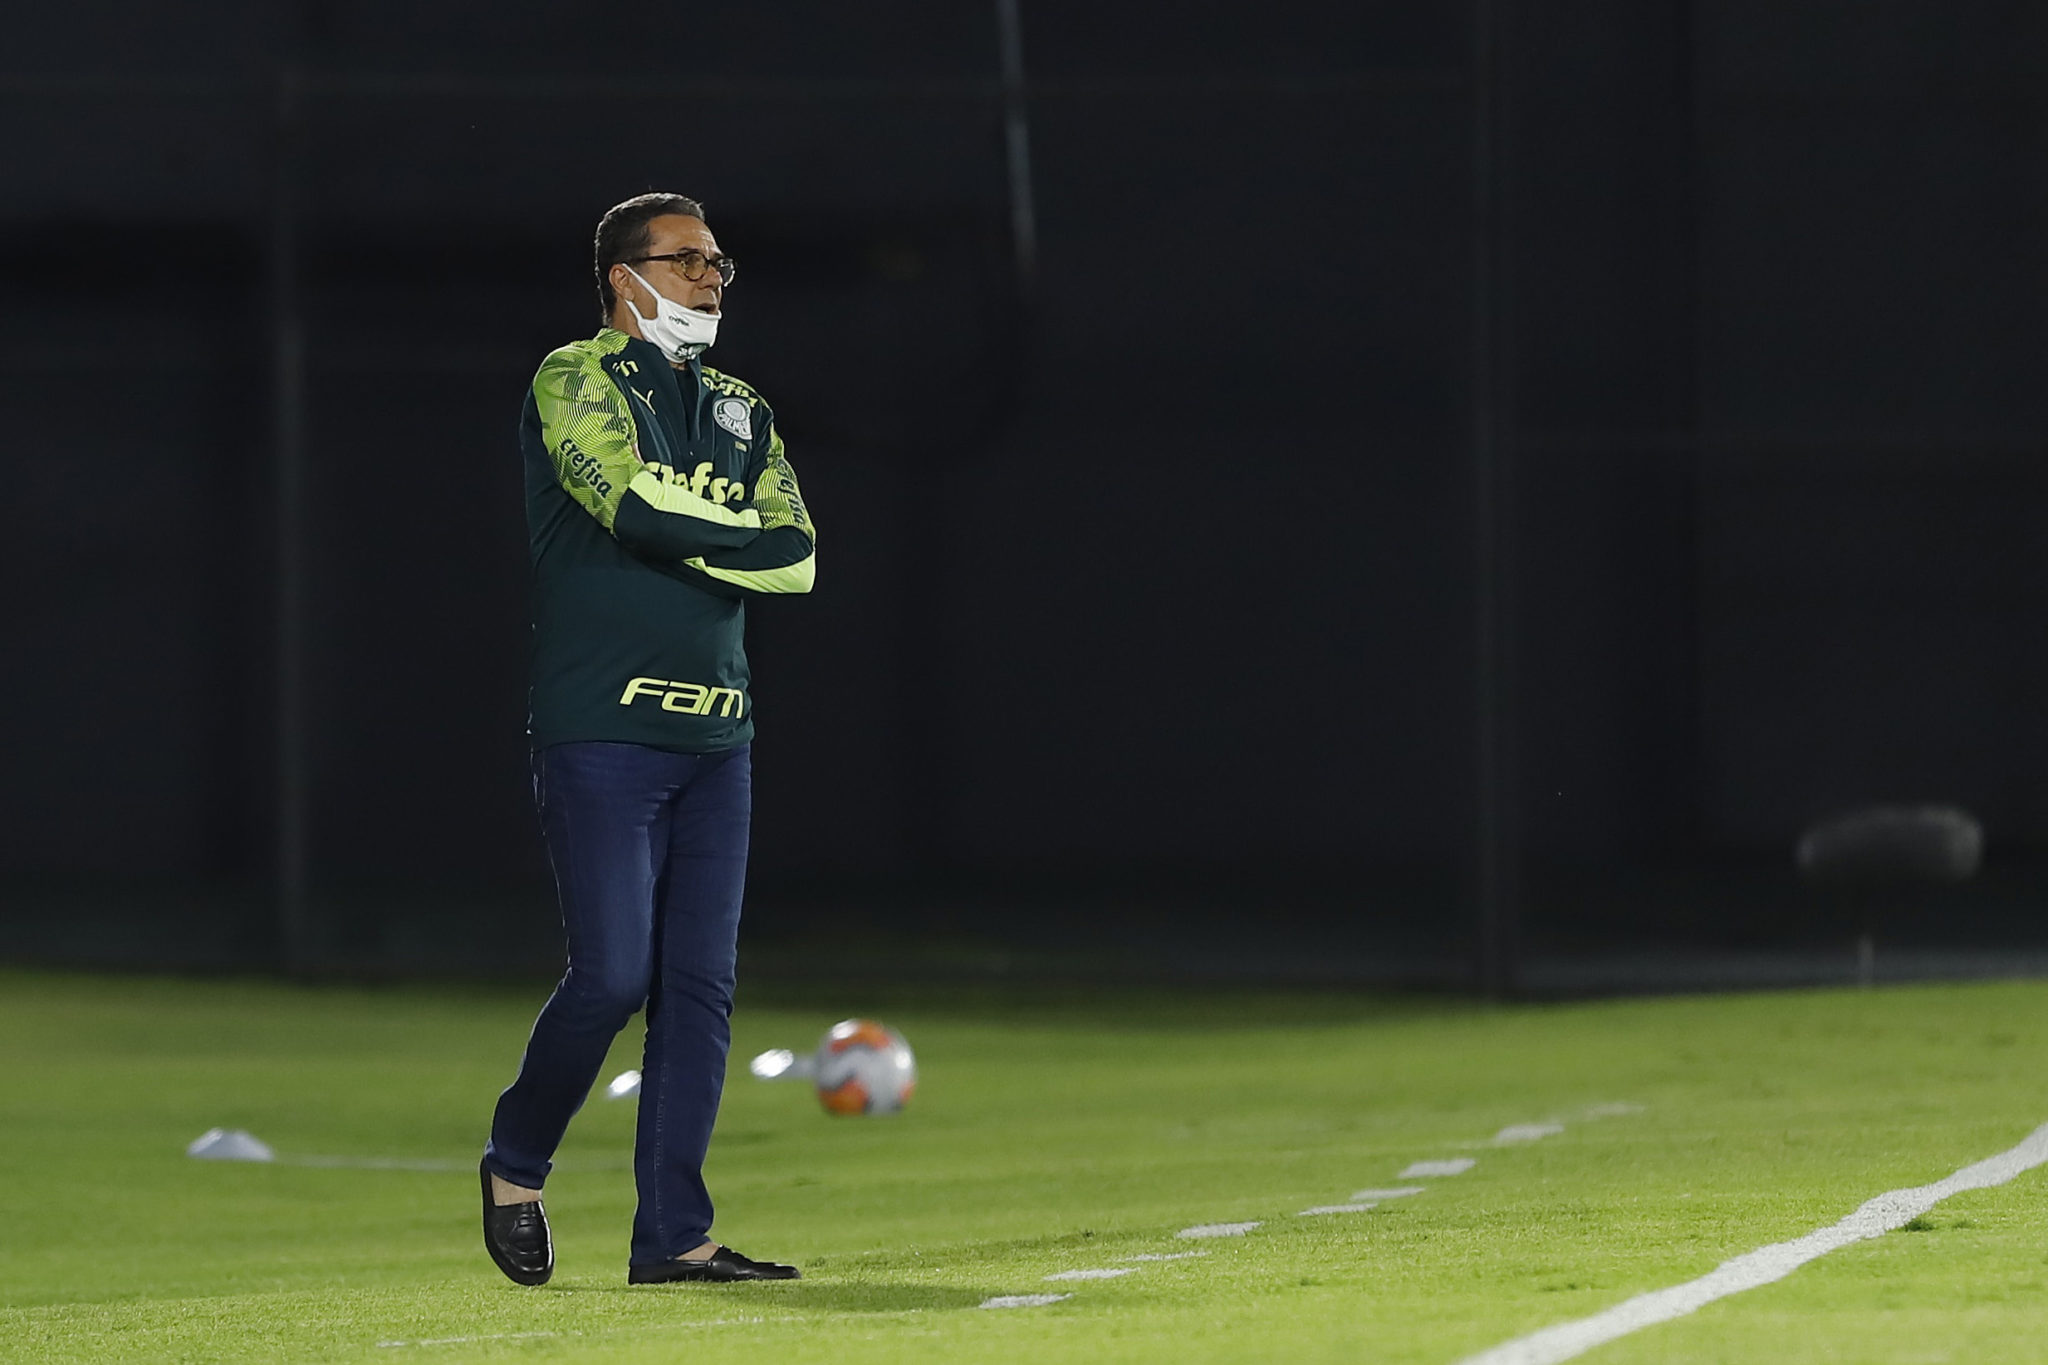 ASUNCION, PARAGUAY - SEPTEMBER 23: Vanderlei Luxemburgo head coach of Palmeiras wearing a protective mask looks on during a group B match of Copa CONMEBOL Libertadores between Guarani and Palmeiras at Defensores del Chaco Stadium on September 23, 2020 in Asuncion, Paraguay. (Photo by Nathalia Aguilar - Pool/Getty Images)